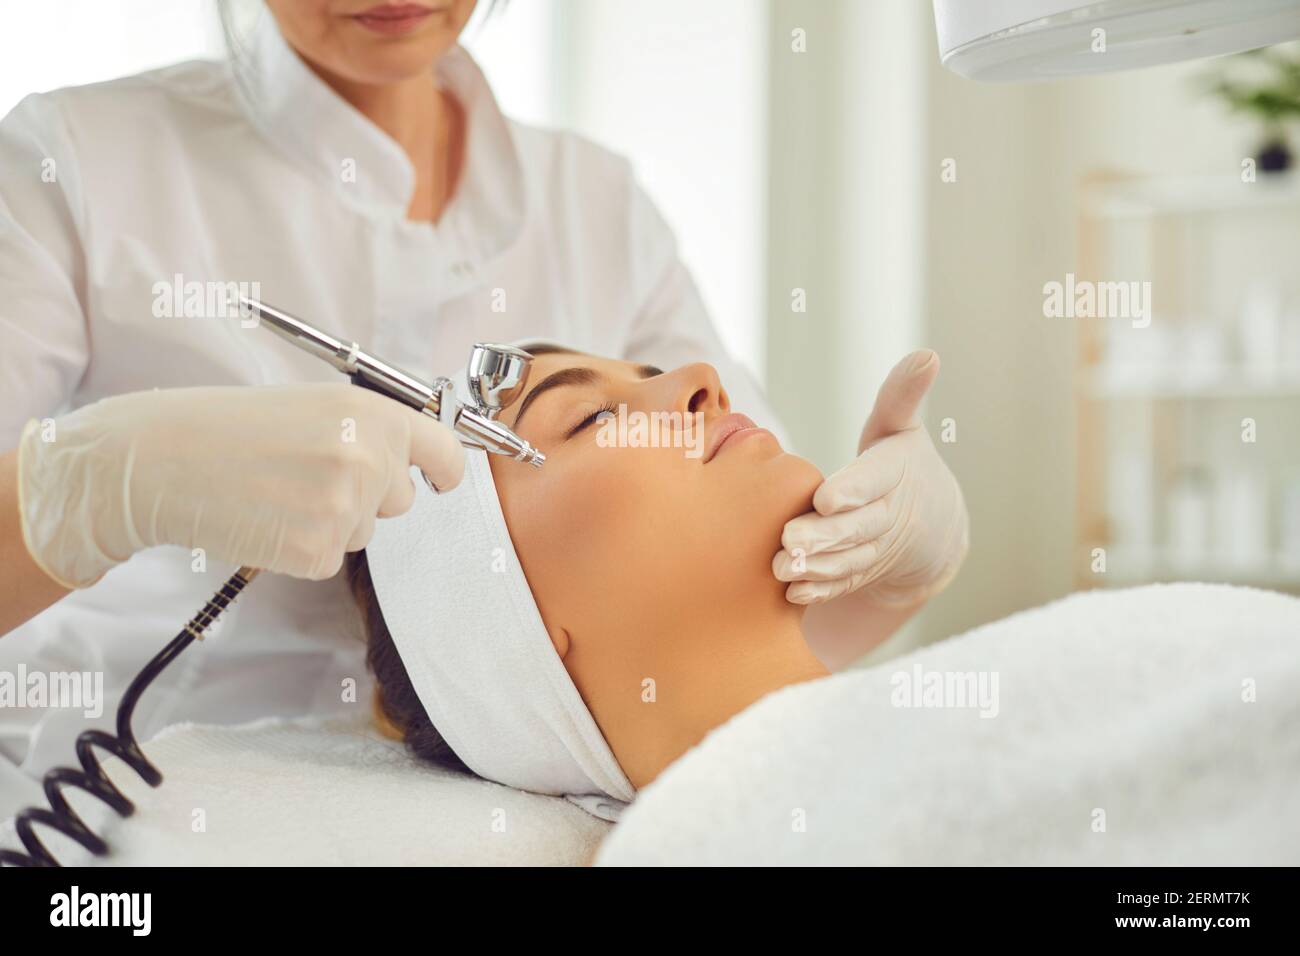 Hands of woman cosmetologist making apparatus procedure of facial oxygen therapy for young woman Stock Photo